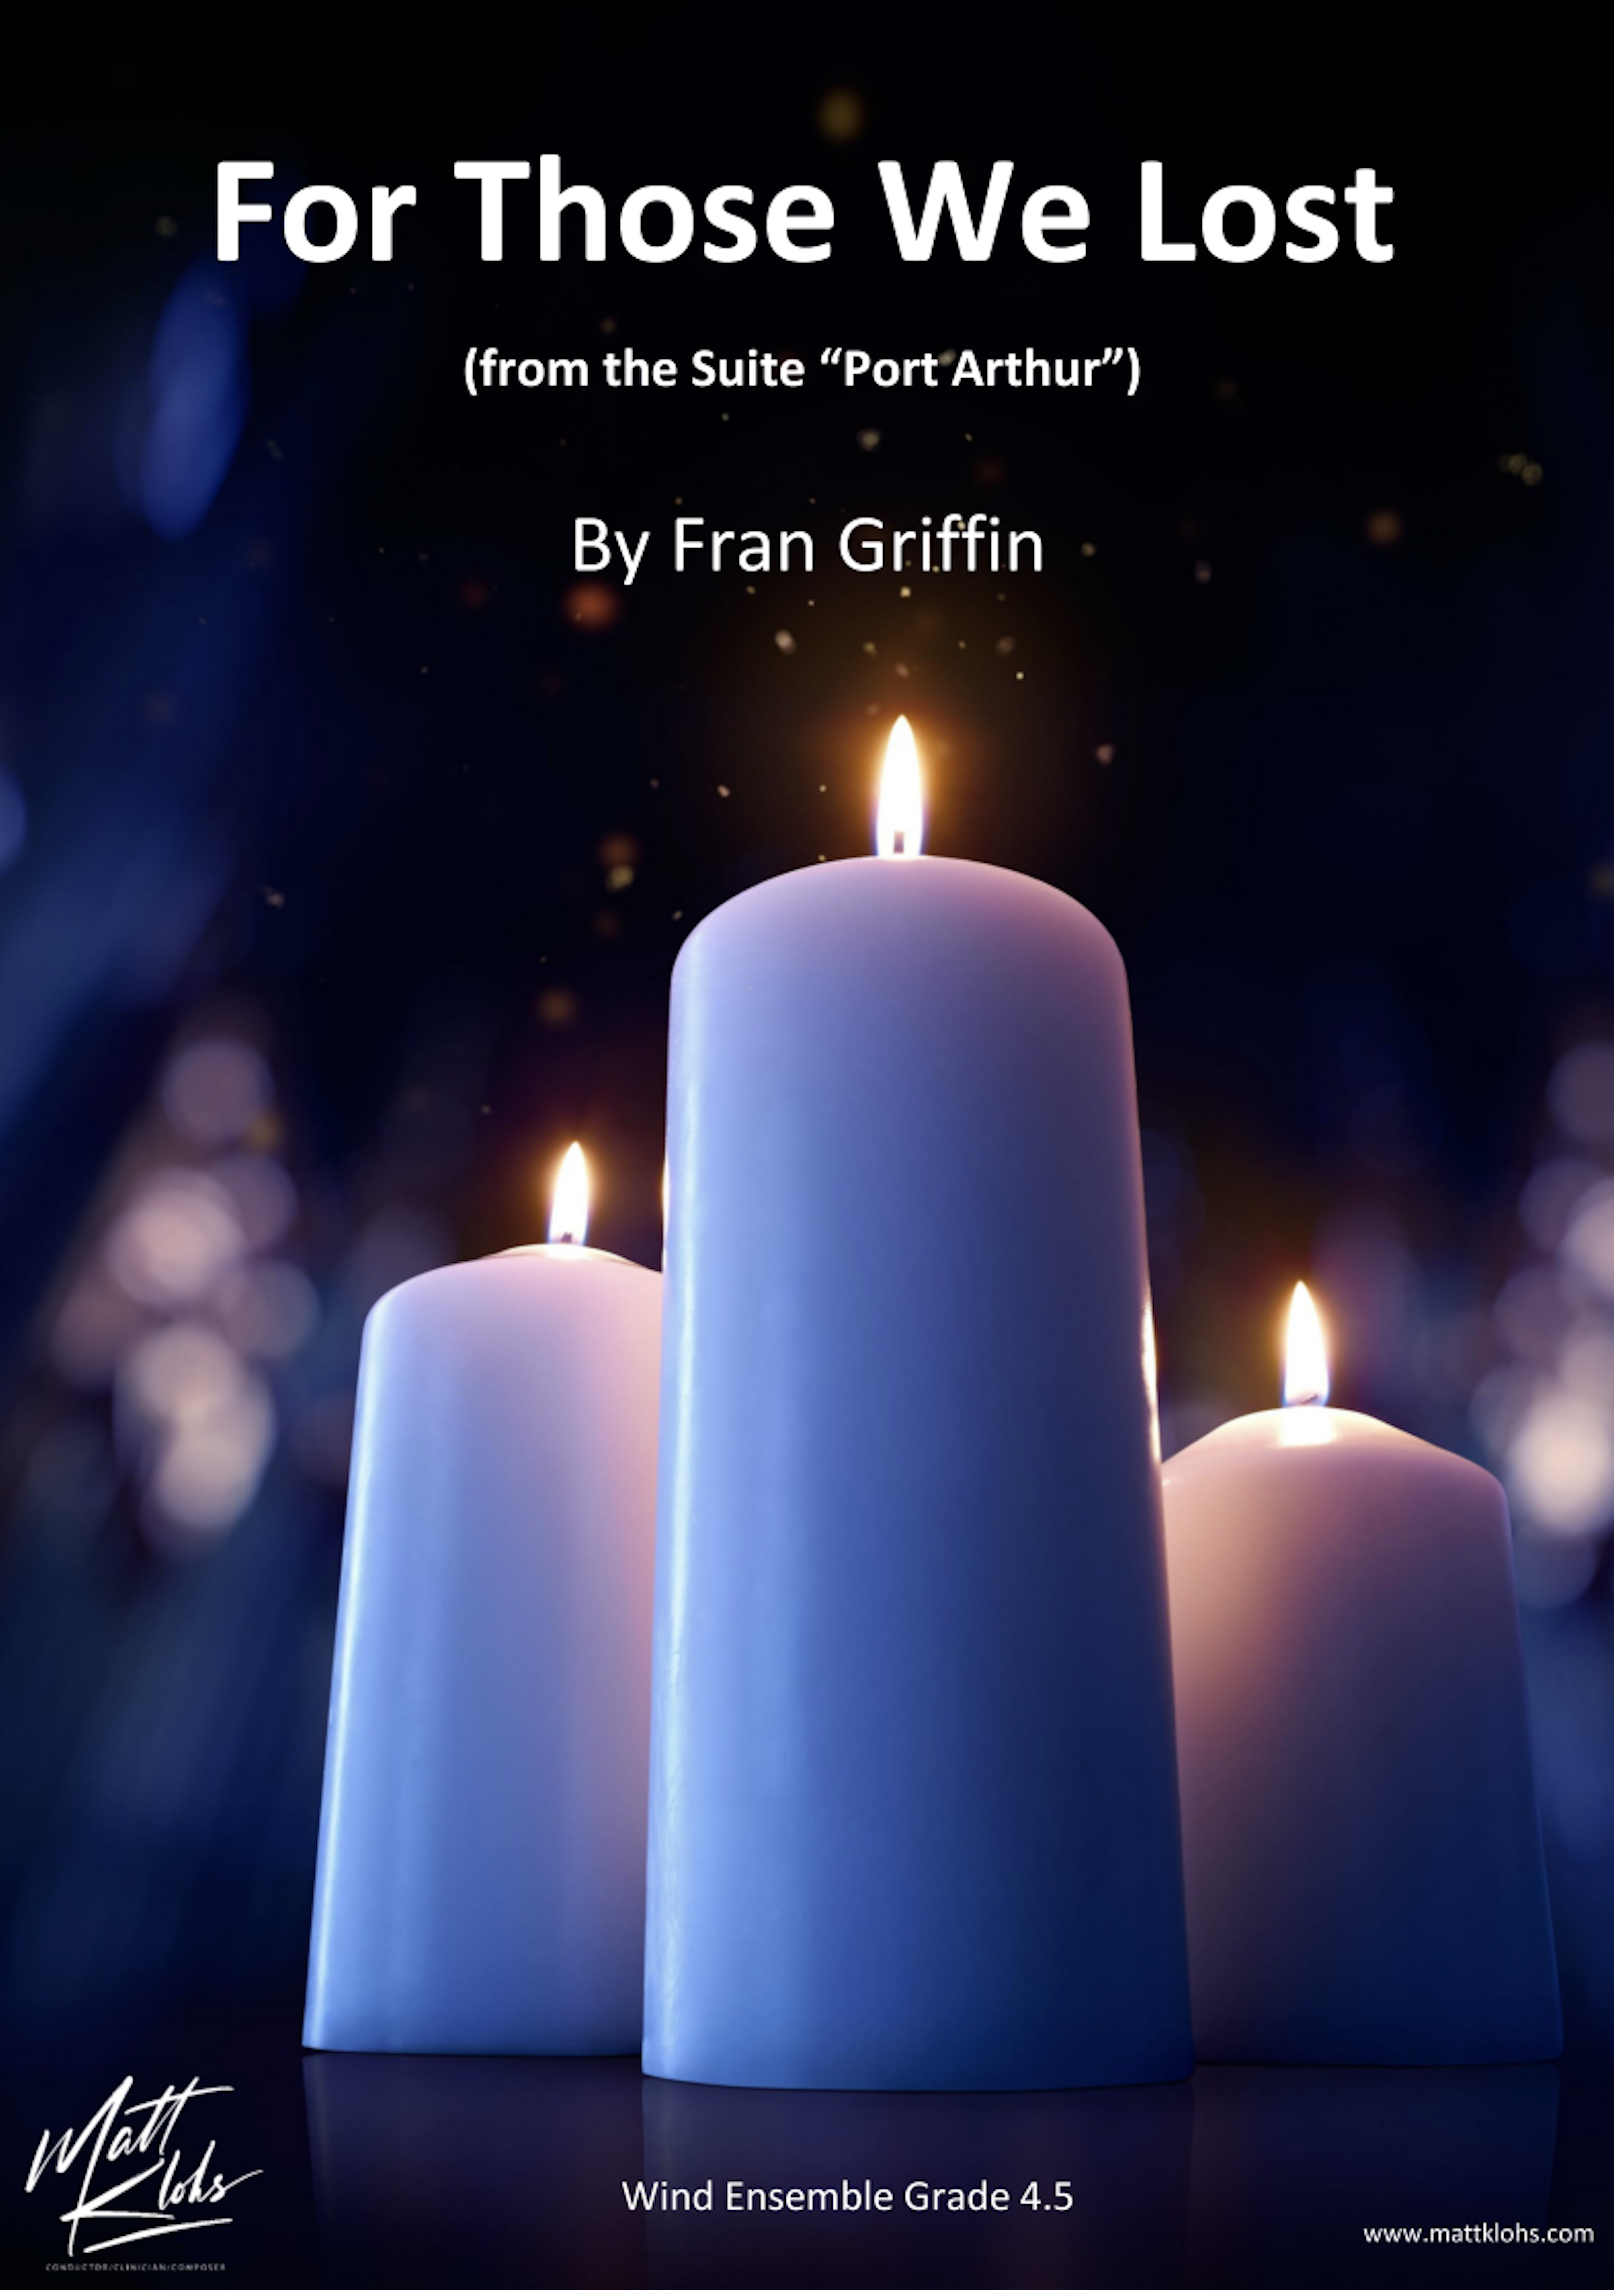 For Those We Lost by Fran Griffin